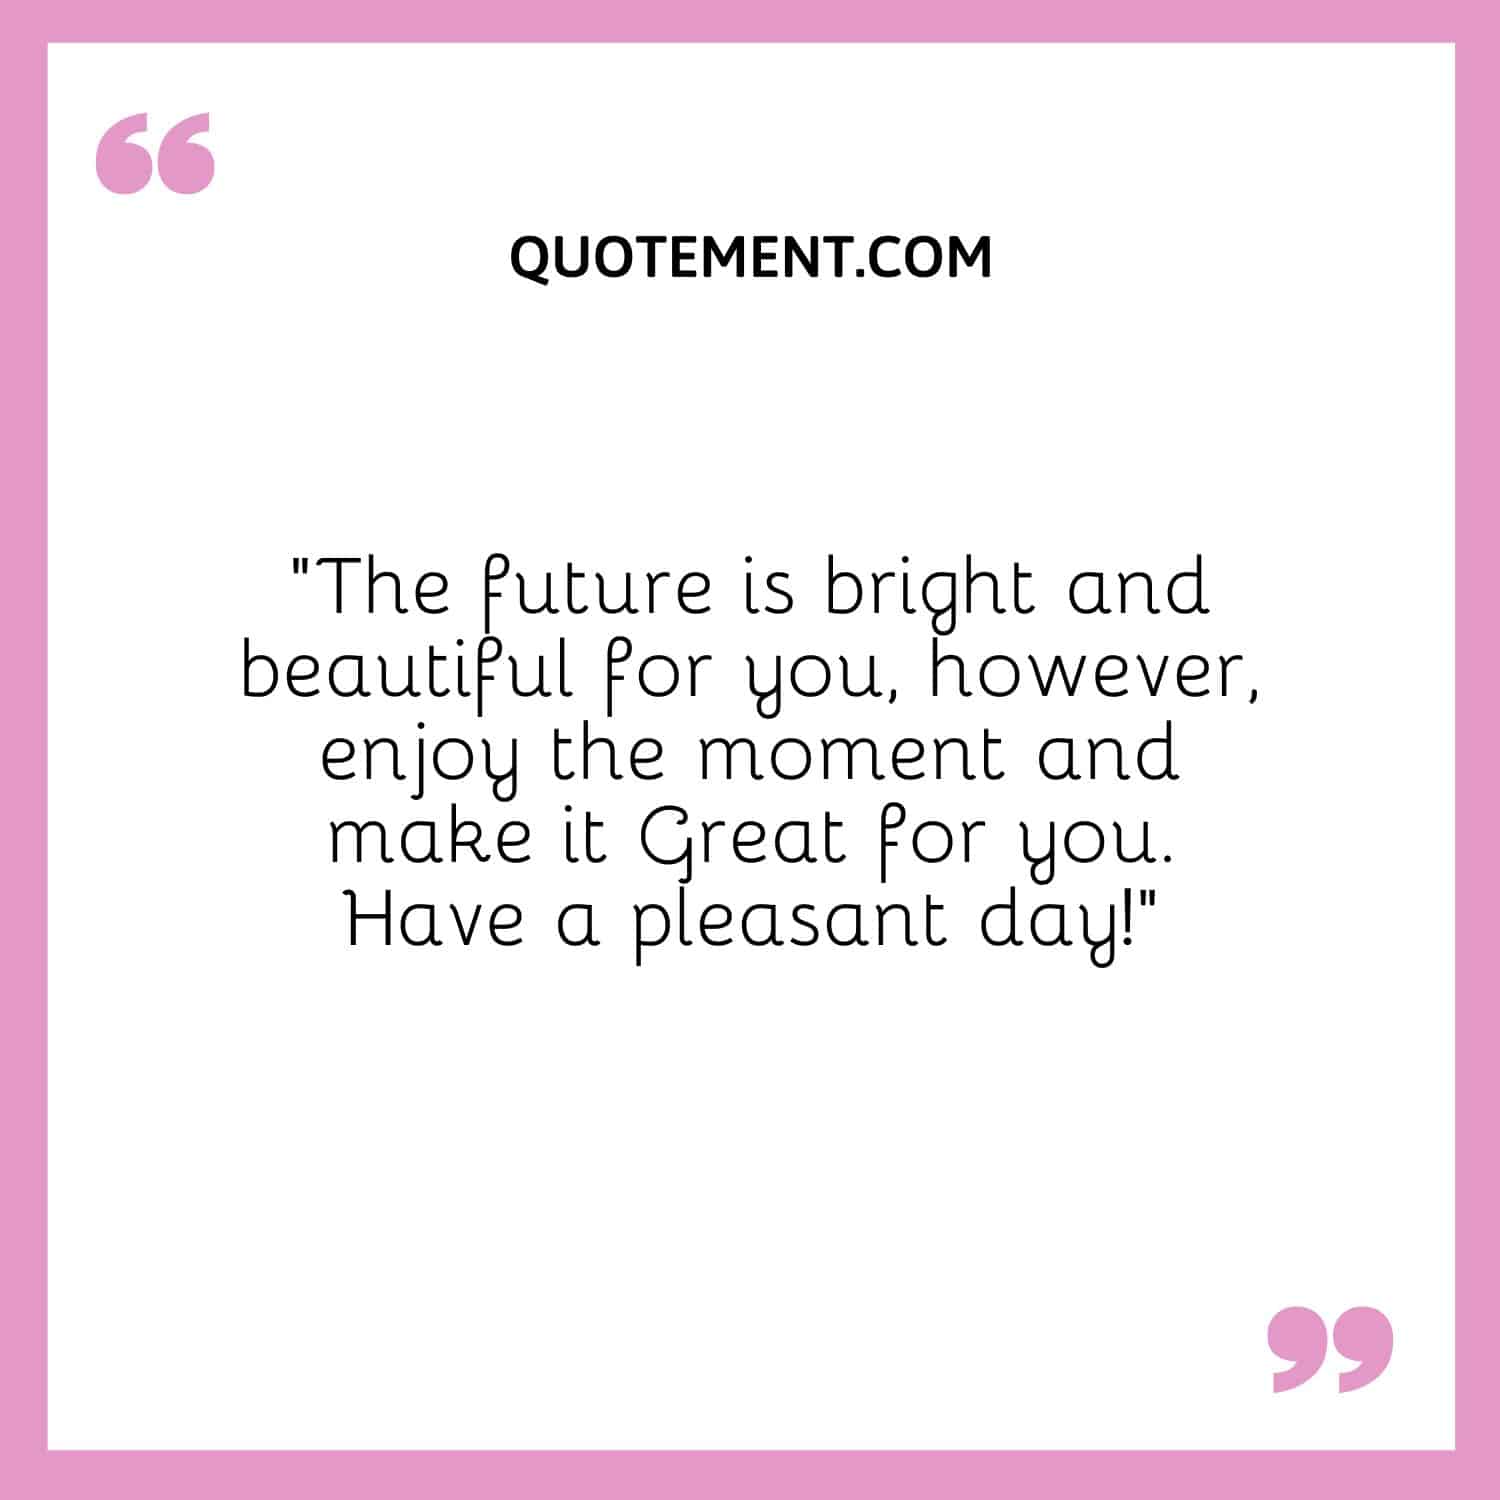 “The future is bright and beautiful for you, however, enjoy the moment and make it Great for you. Have a pleasant day!”